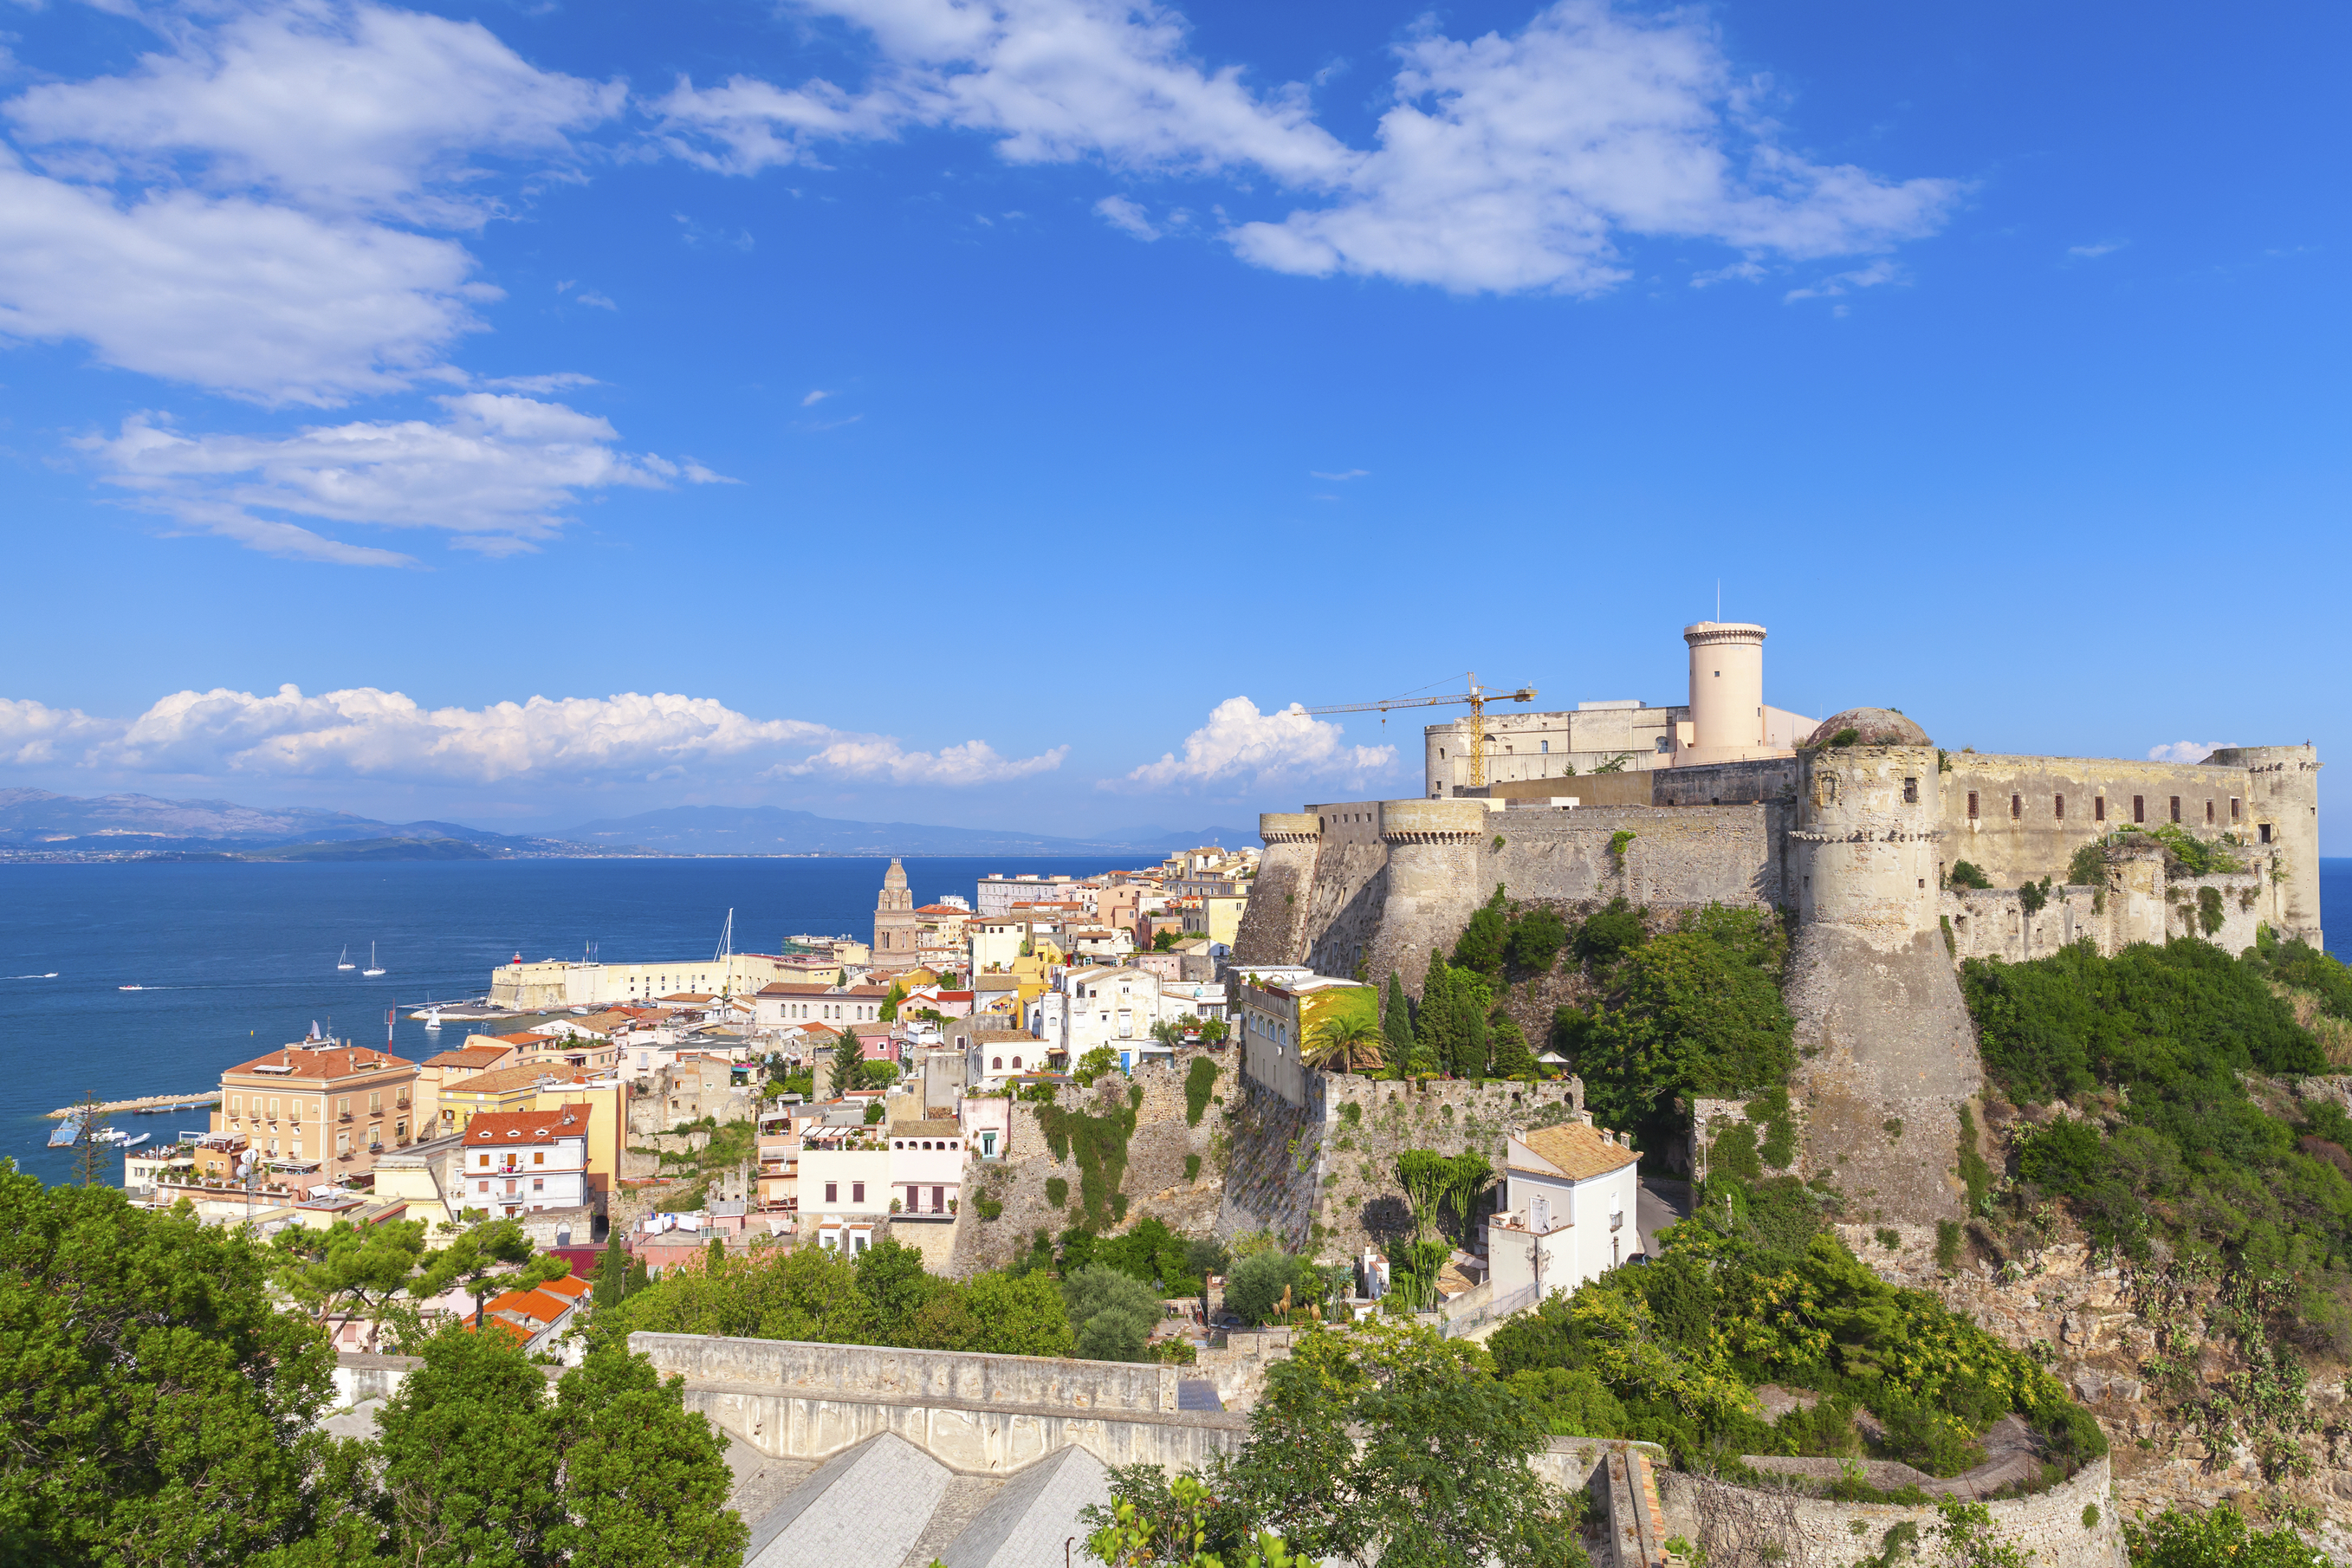 Landscape of old town Gaeta with ancient Aragonese-Angevine Castle, Italy (Getty Images/iStockphoto)